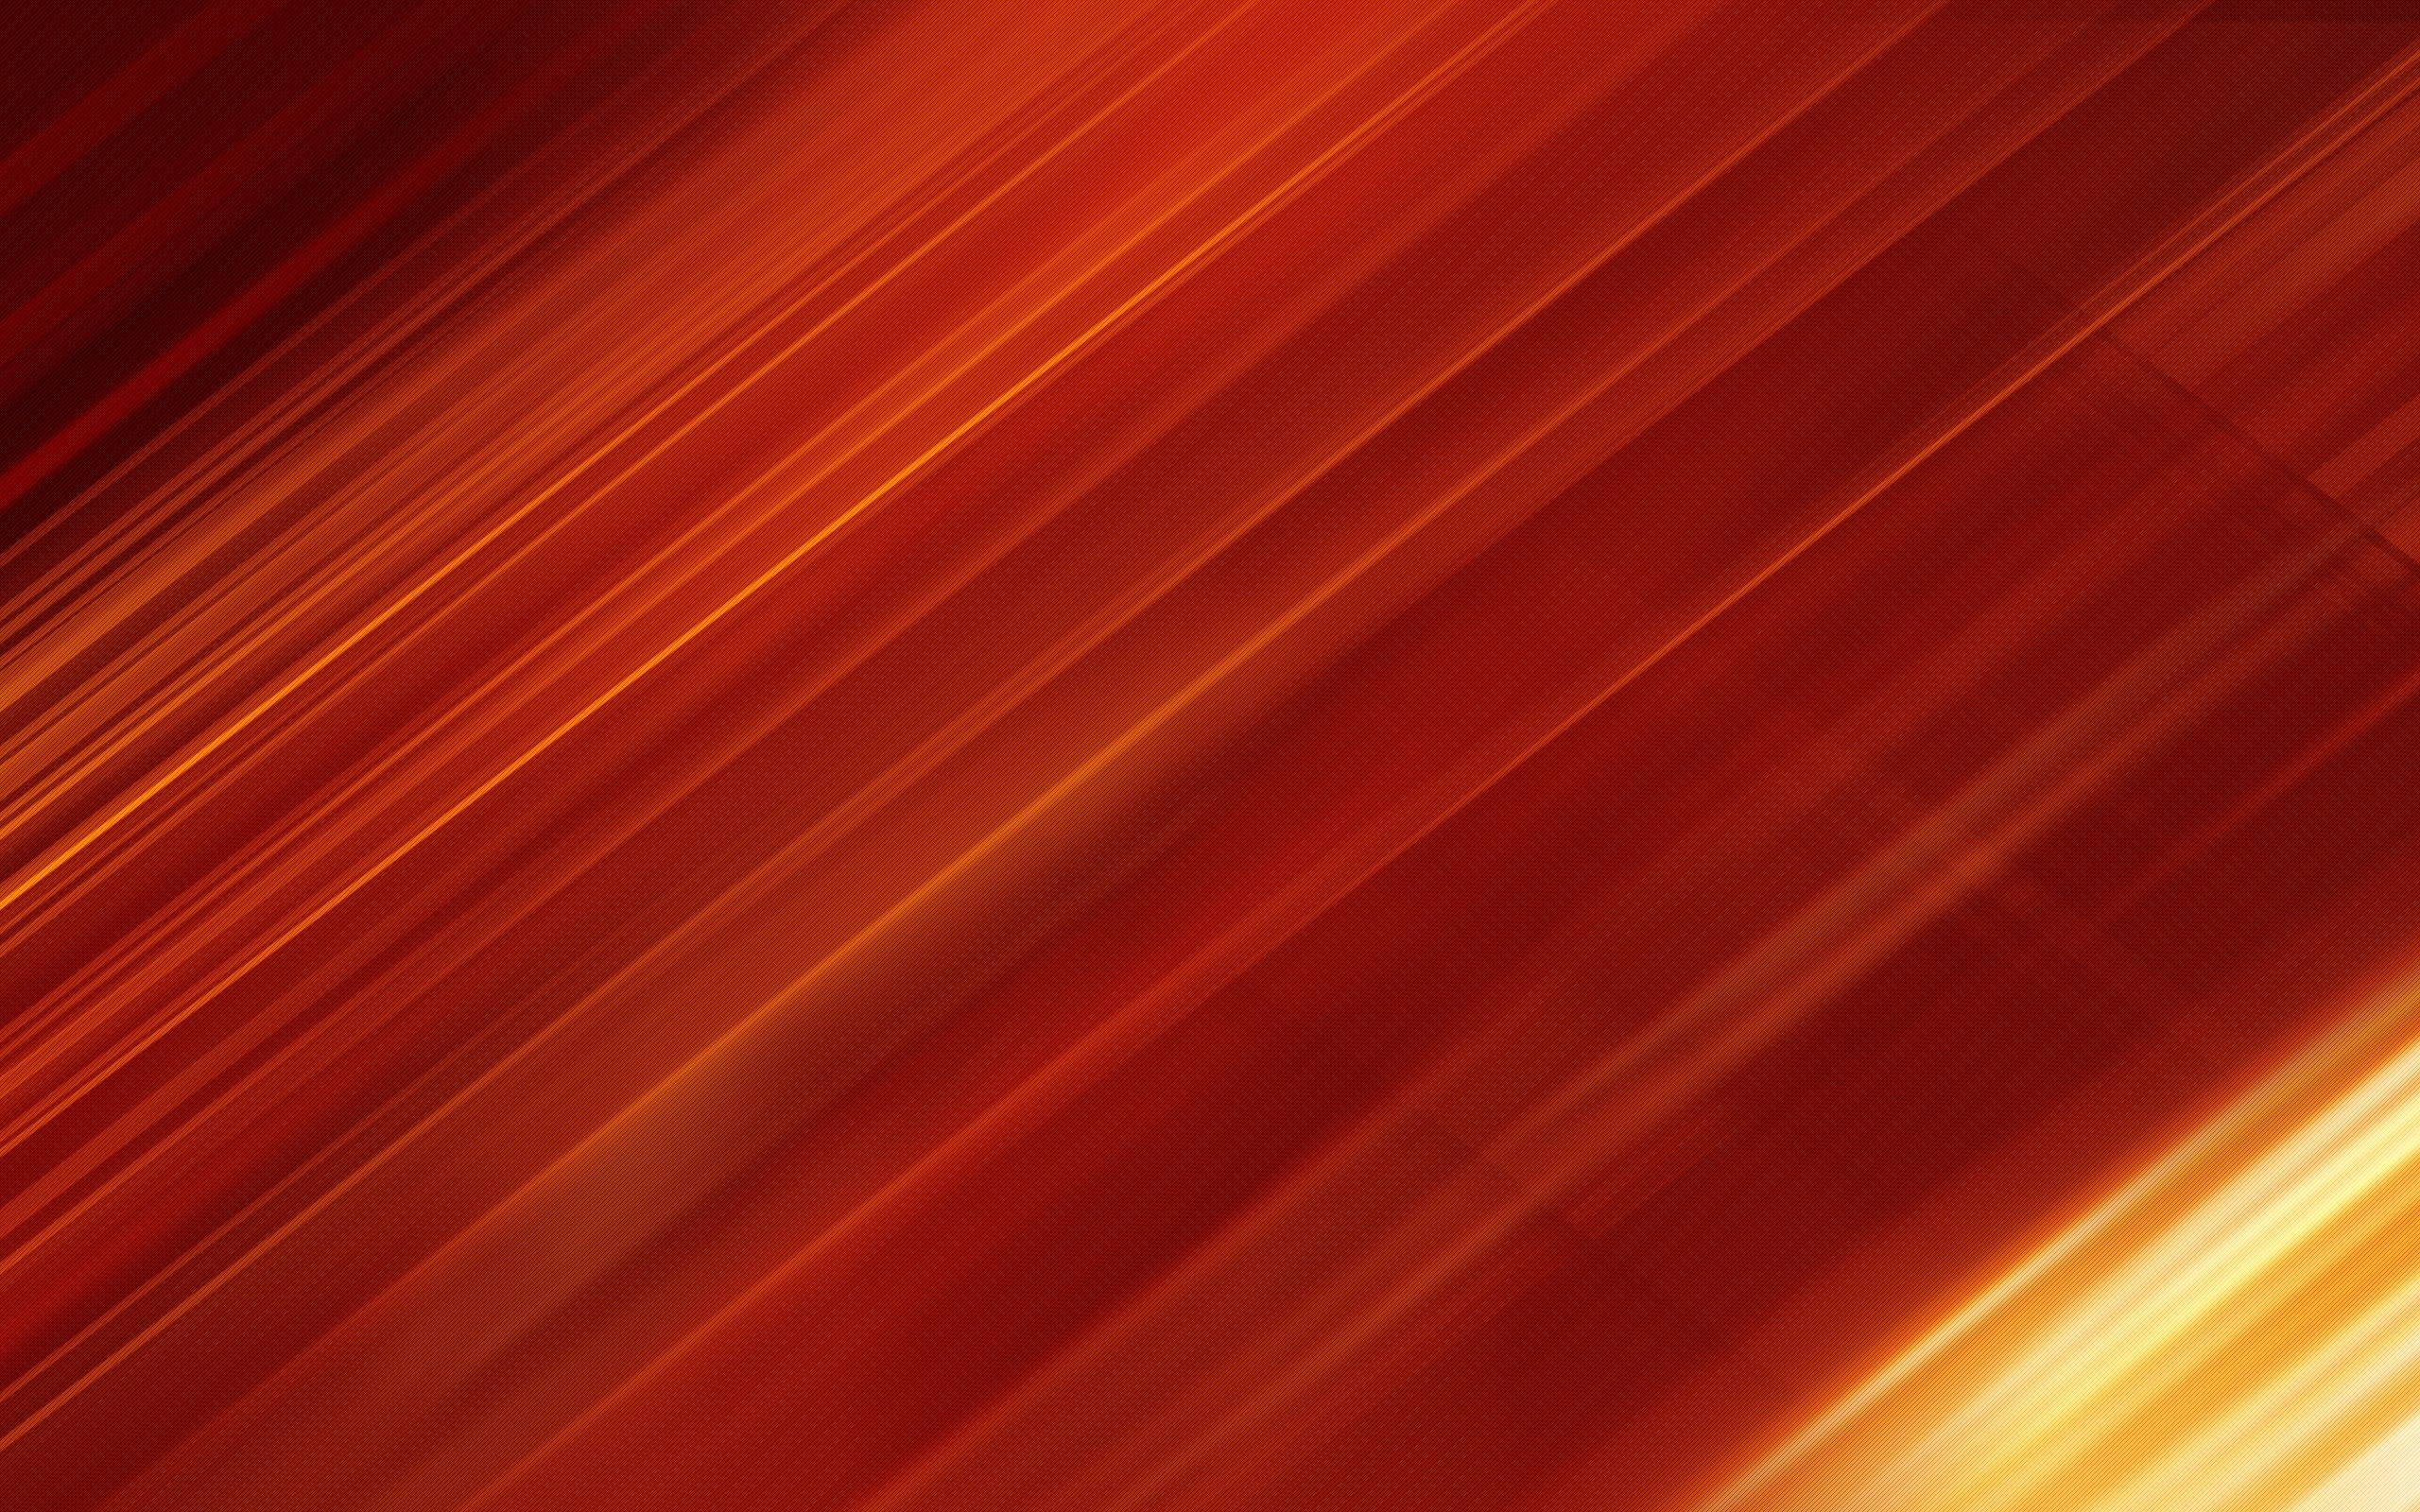 Red Black And Gold Wallpapers